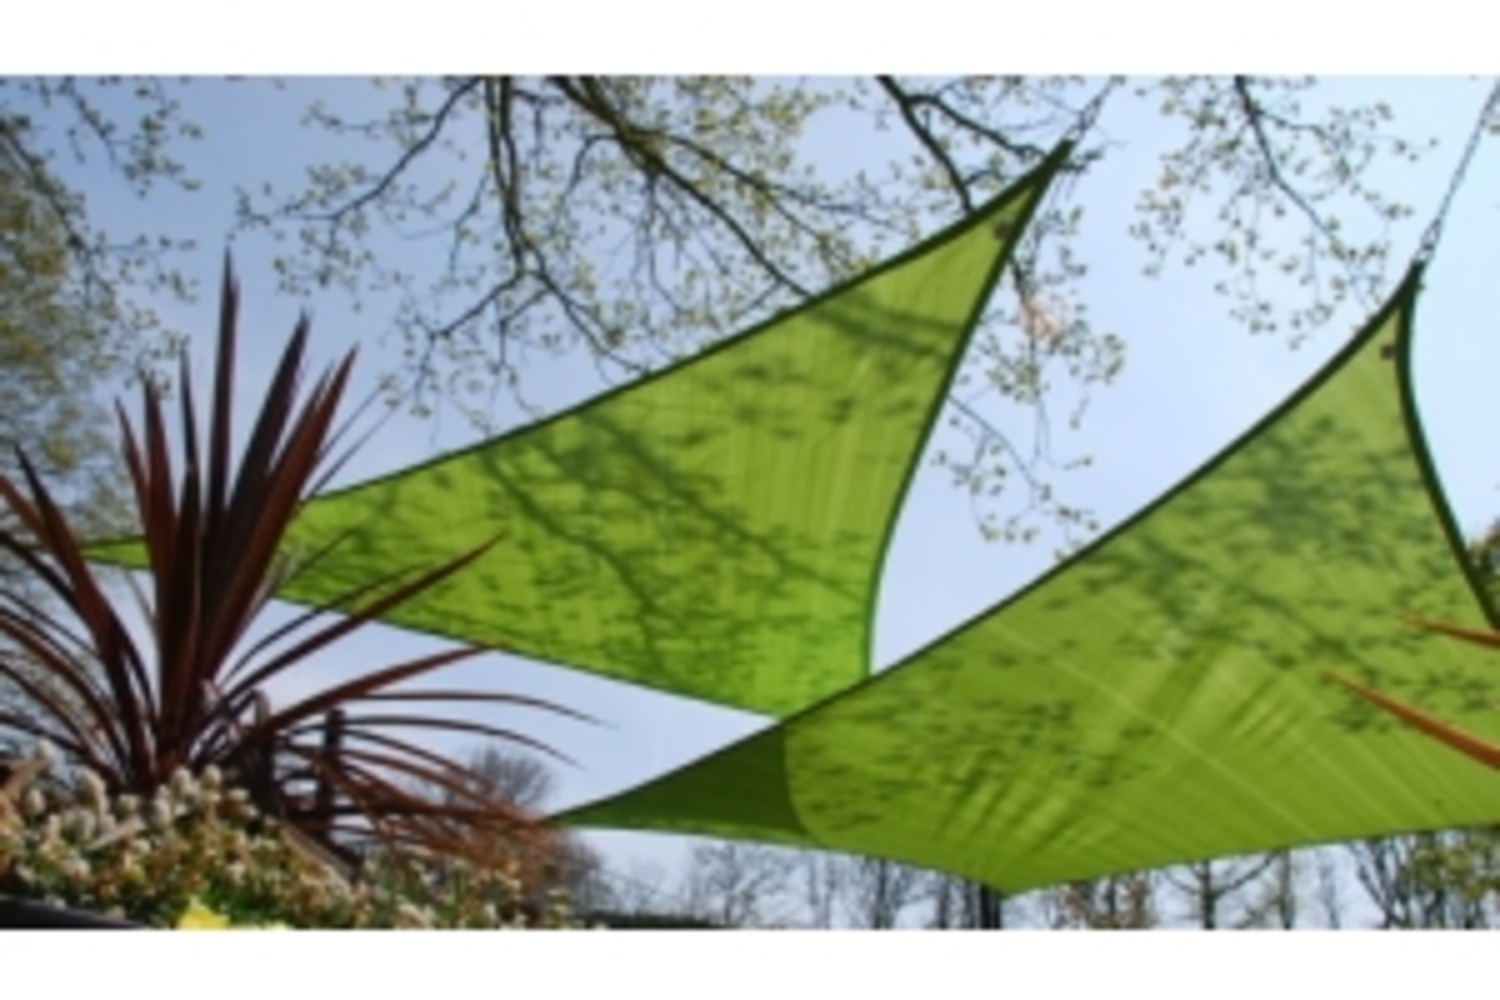  How to mount a nesling shade sail?